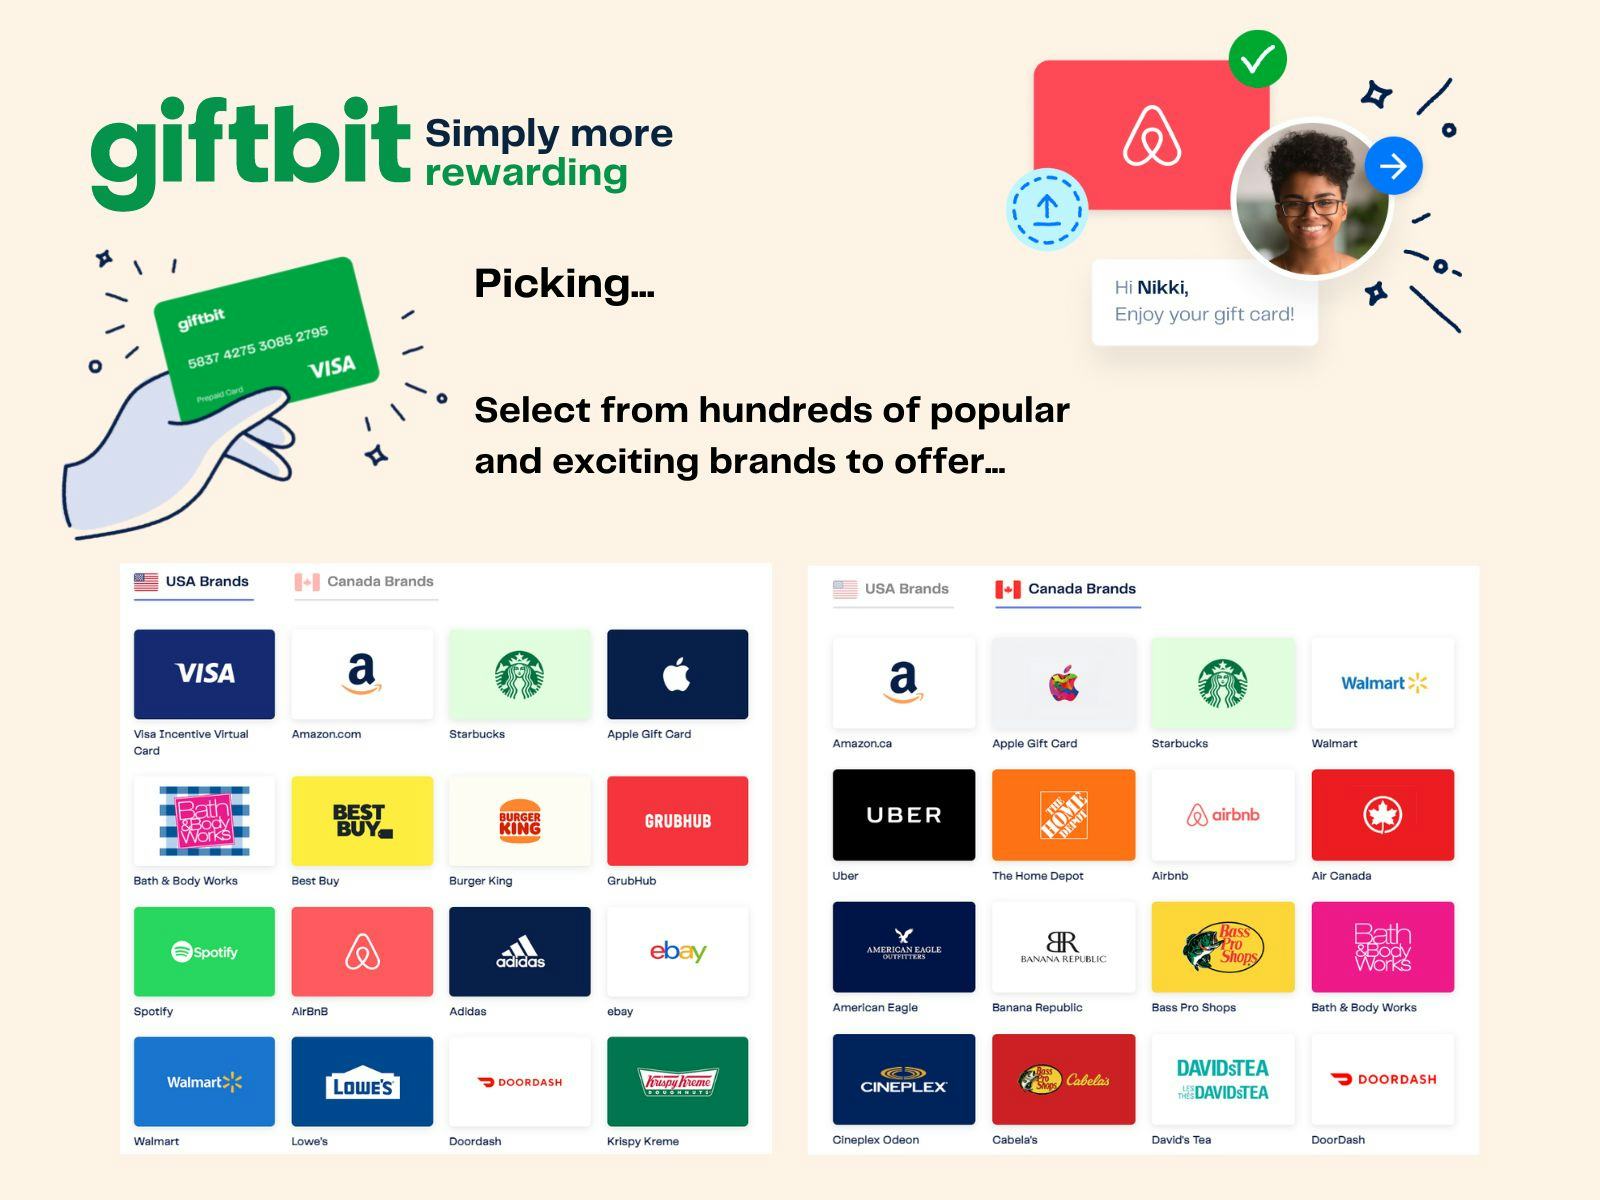 Giftbit Software - So many brands to choose from!